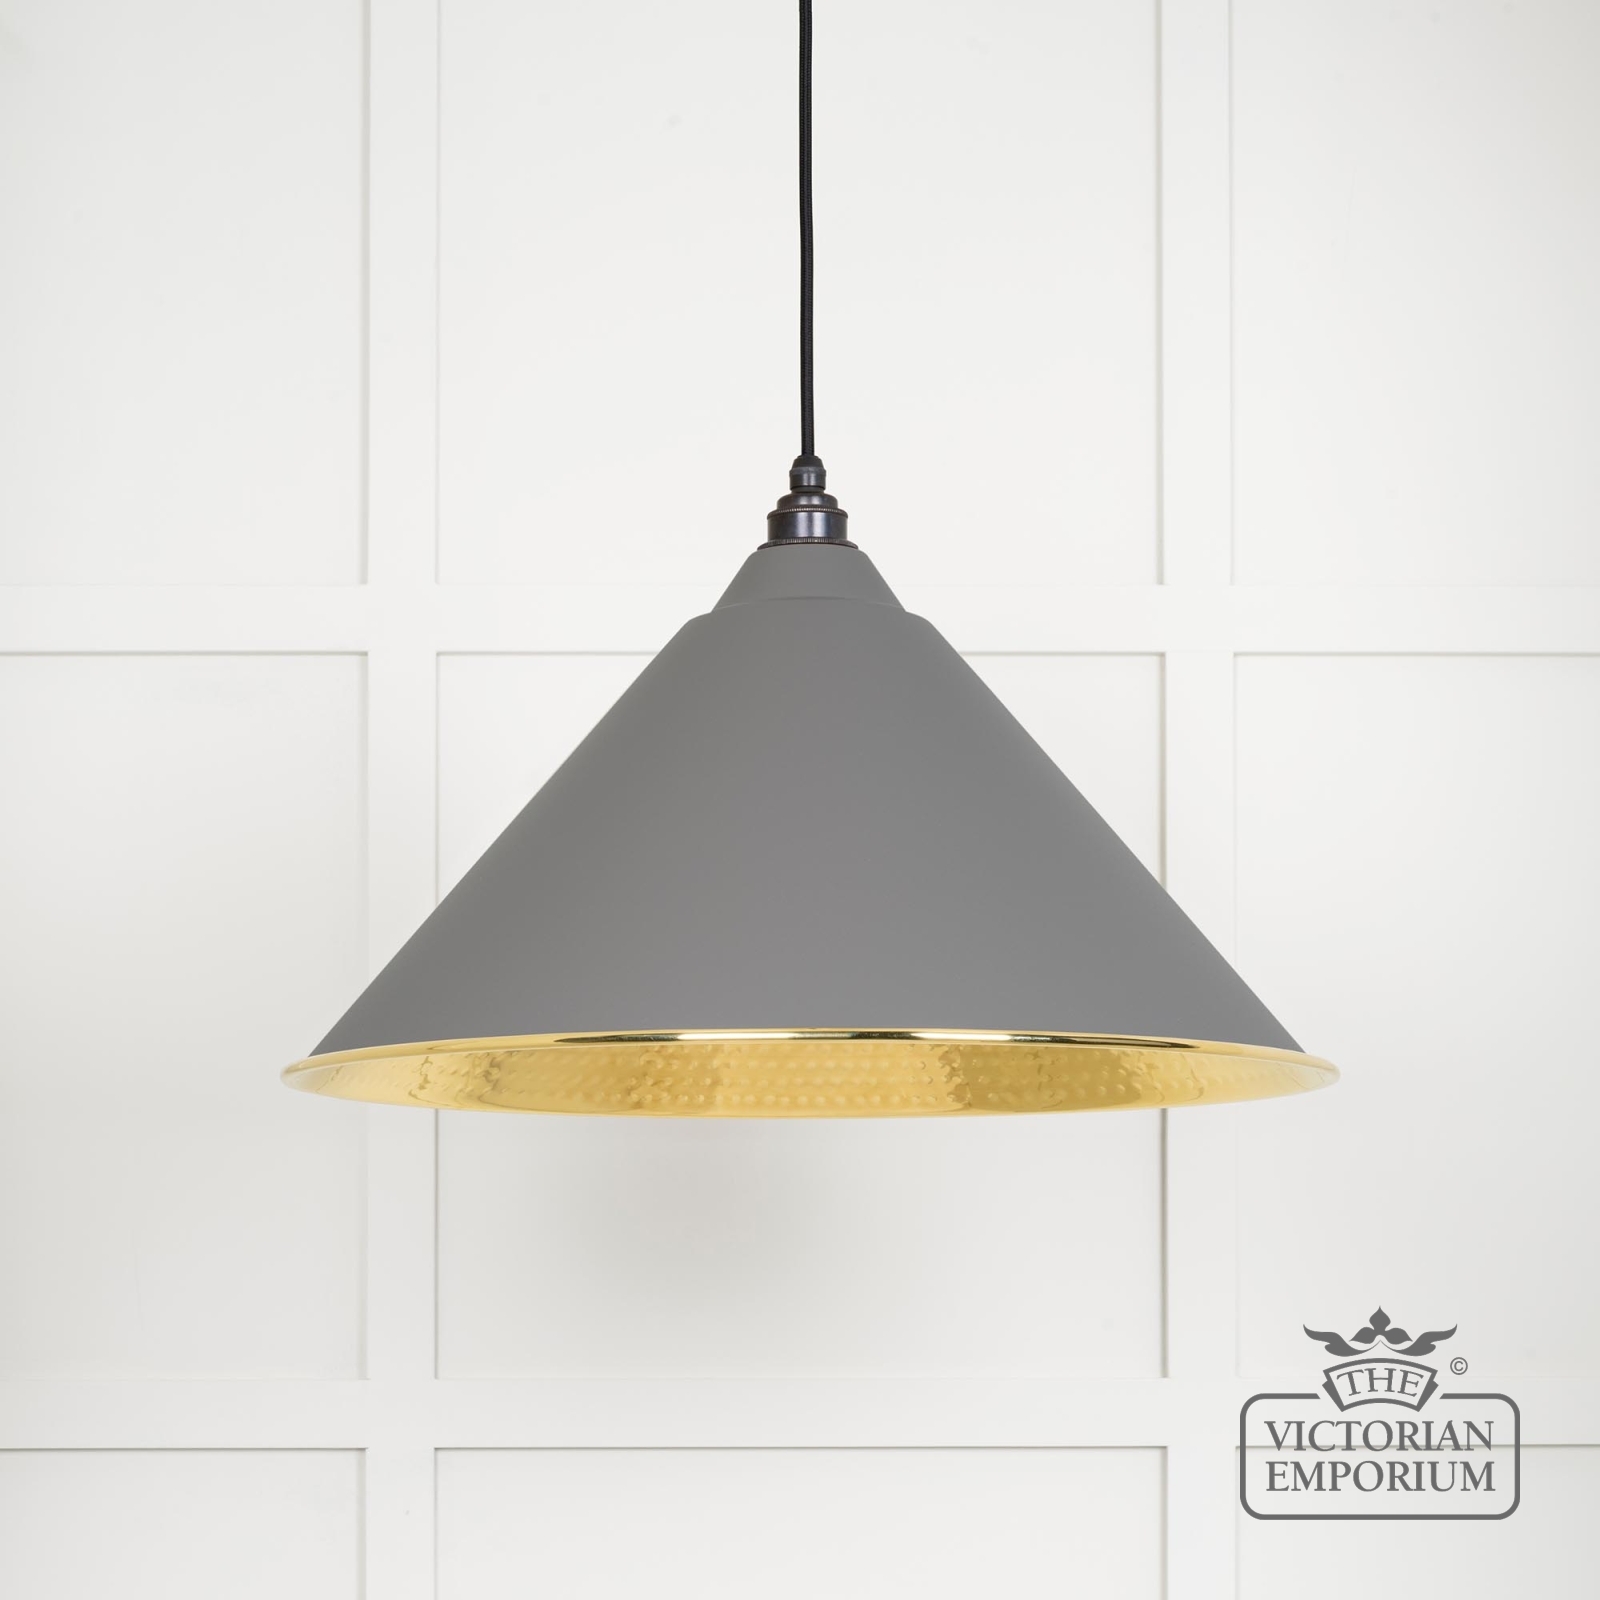 Hockliffe pendant light in Bluff and Hammered Brass